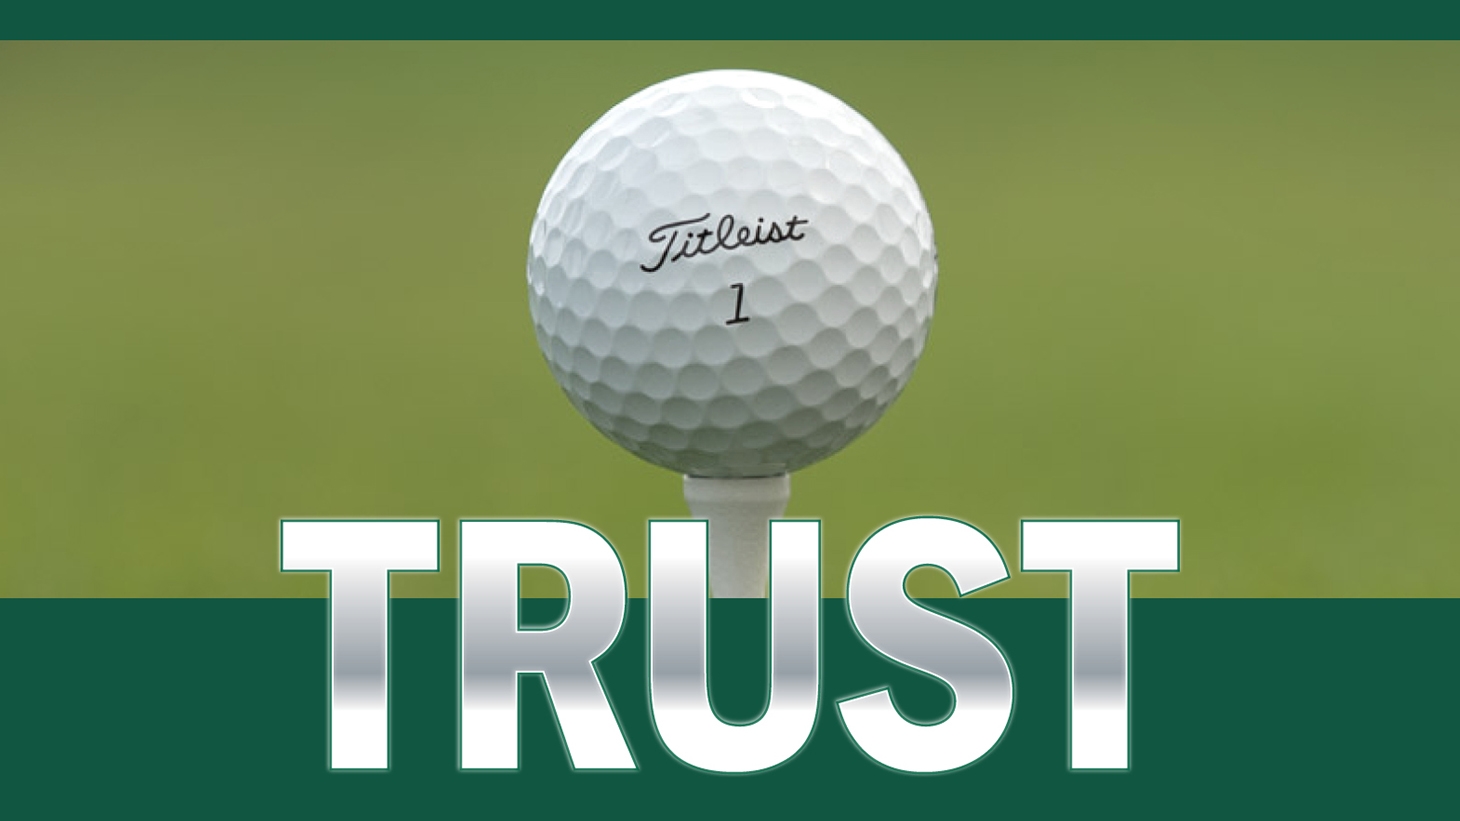 Titleist Pro V1 golf ball teed up at the 2018 Masters